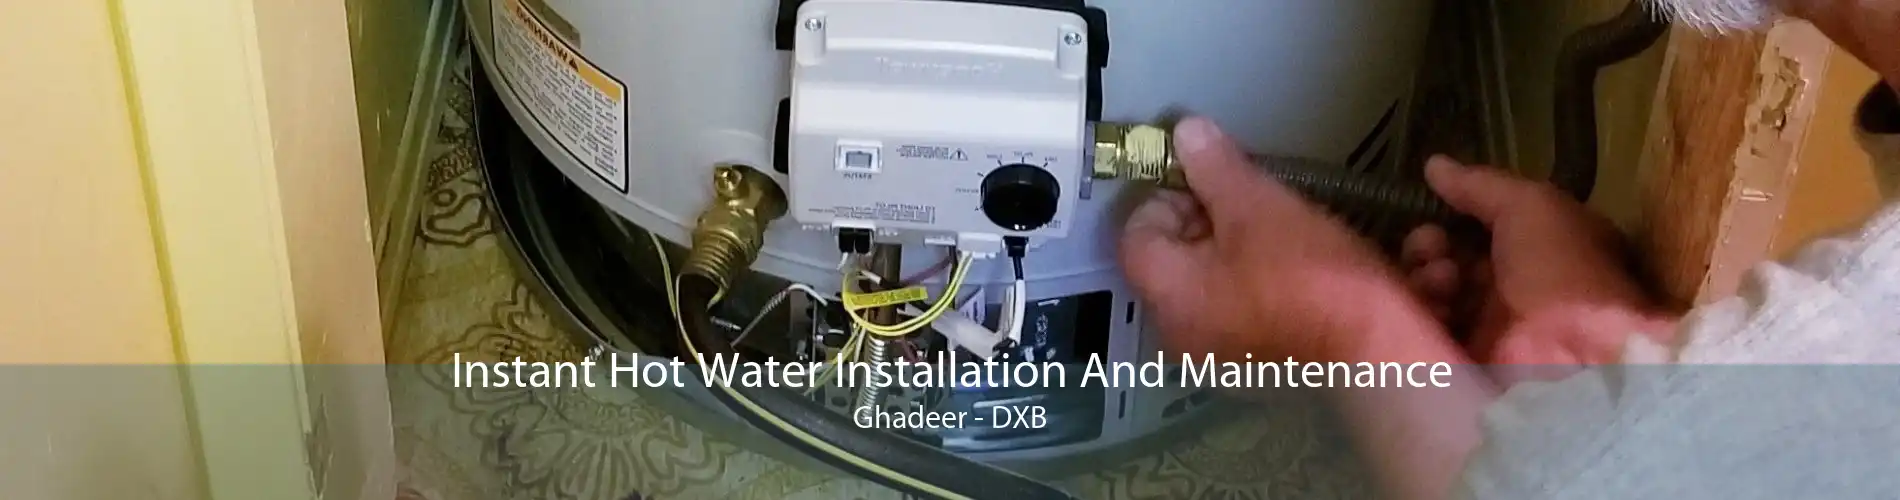 Instant Hot Water Installation And Maintenance Ghadeer - DXB